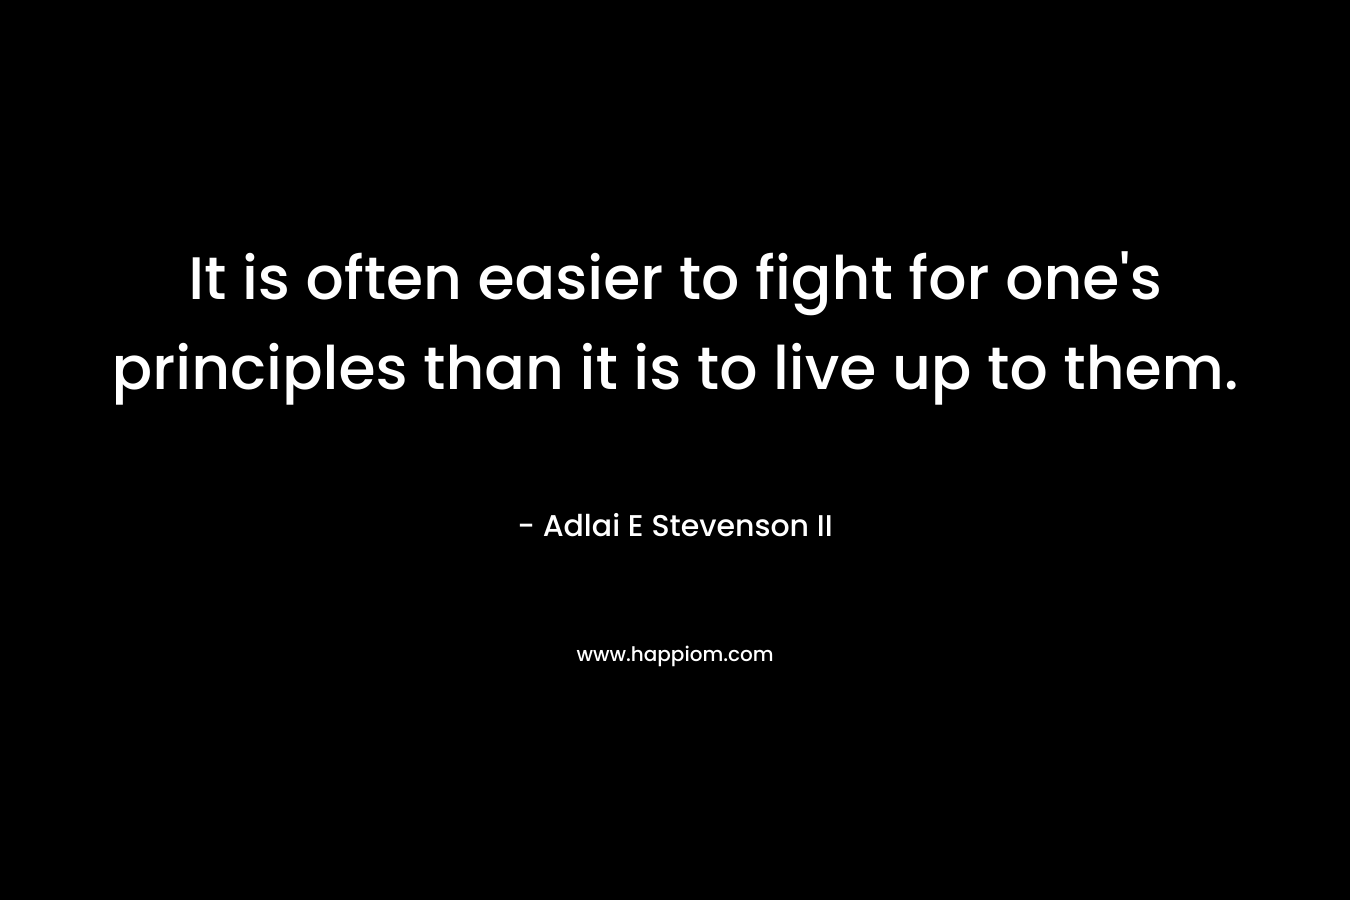 It is often easier to fight for one’s principles than it is to live up to them. – Adlai E Stevenson II